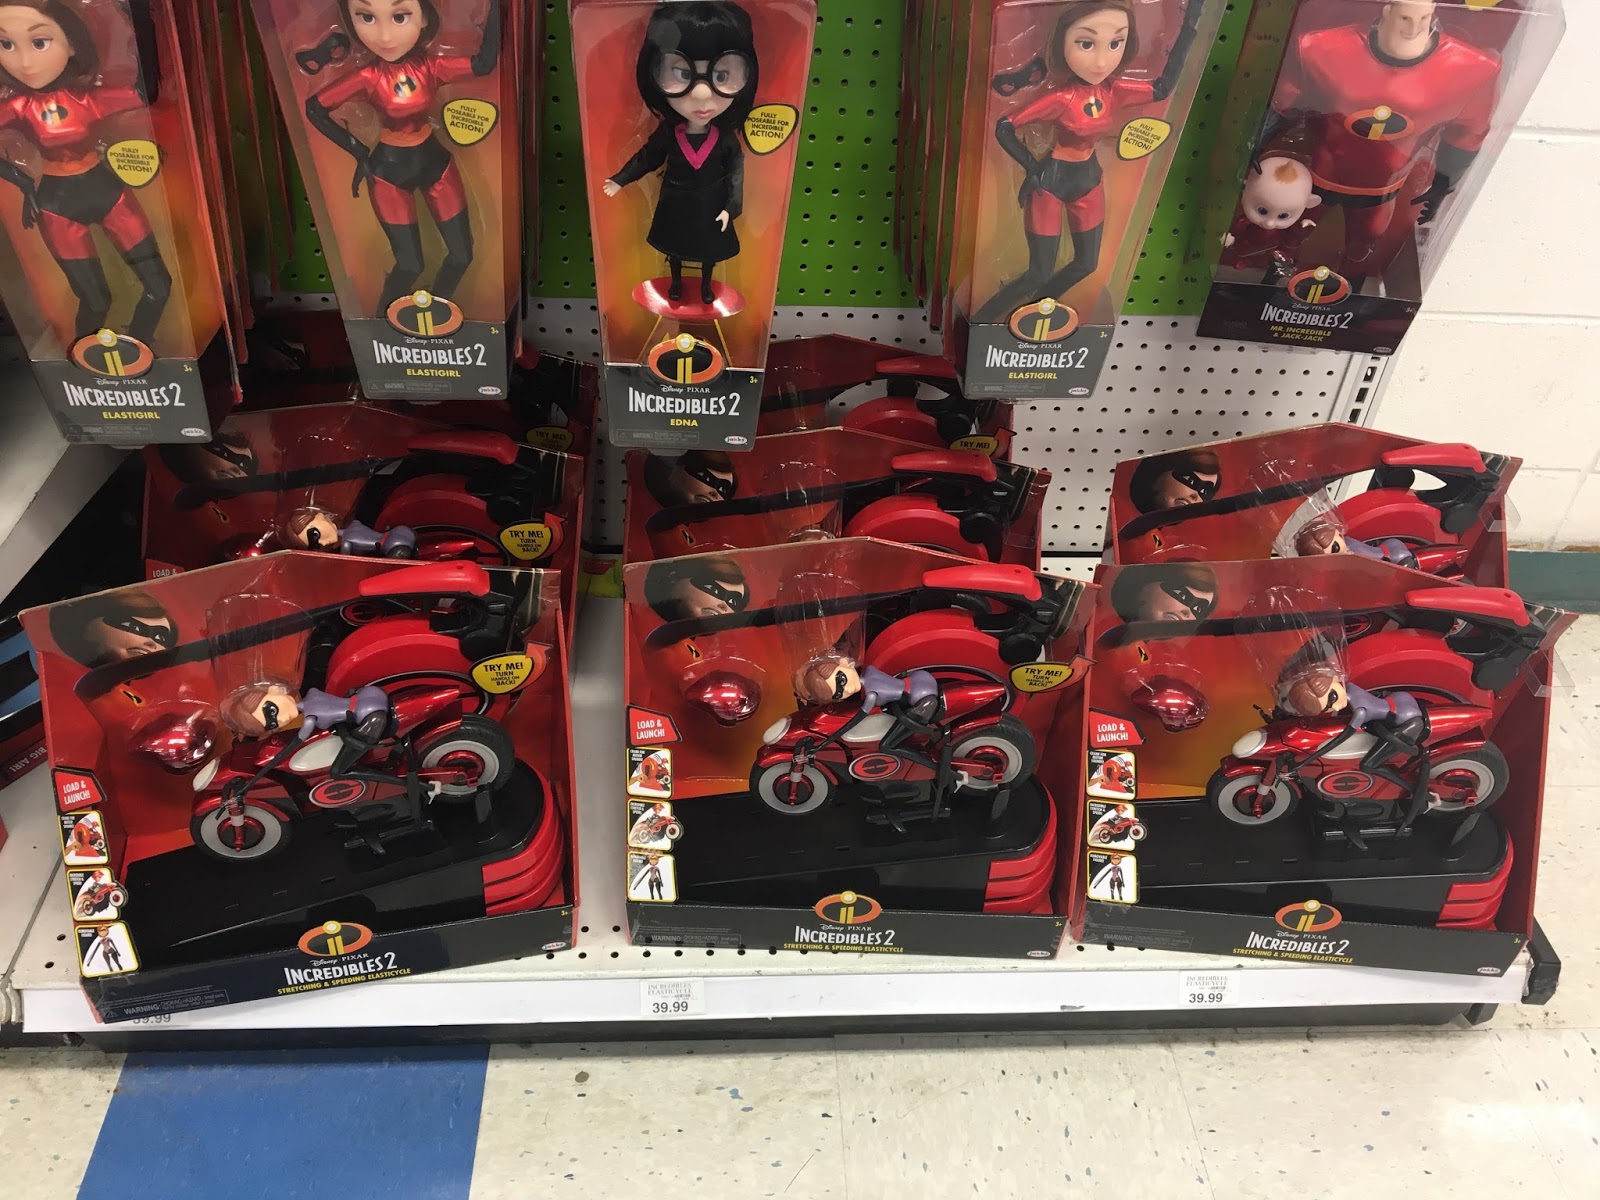 toys r us pixar incredibles 2 toys release